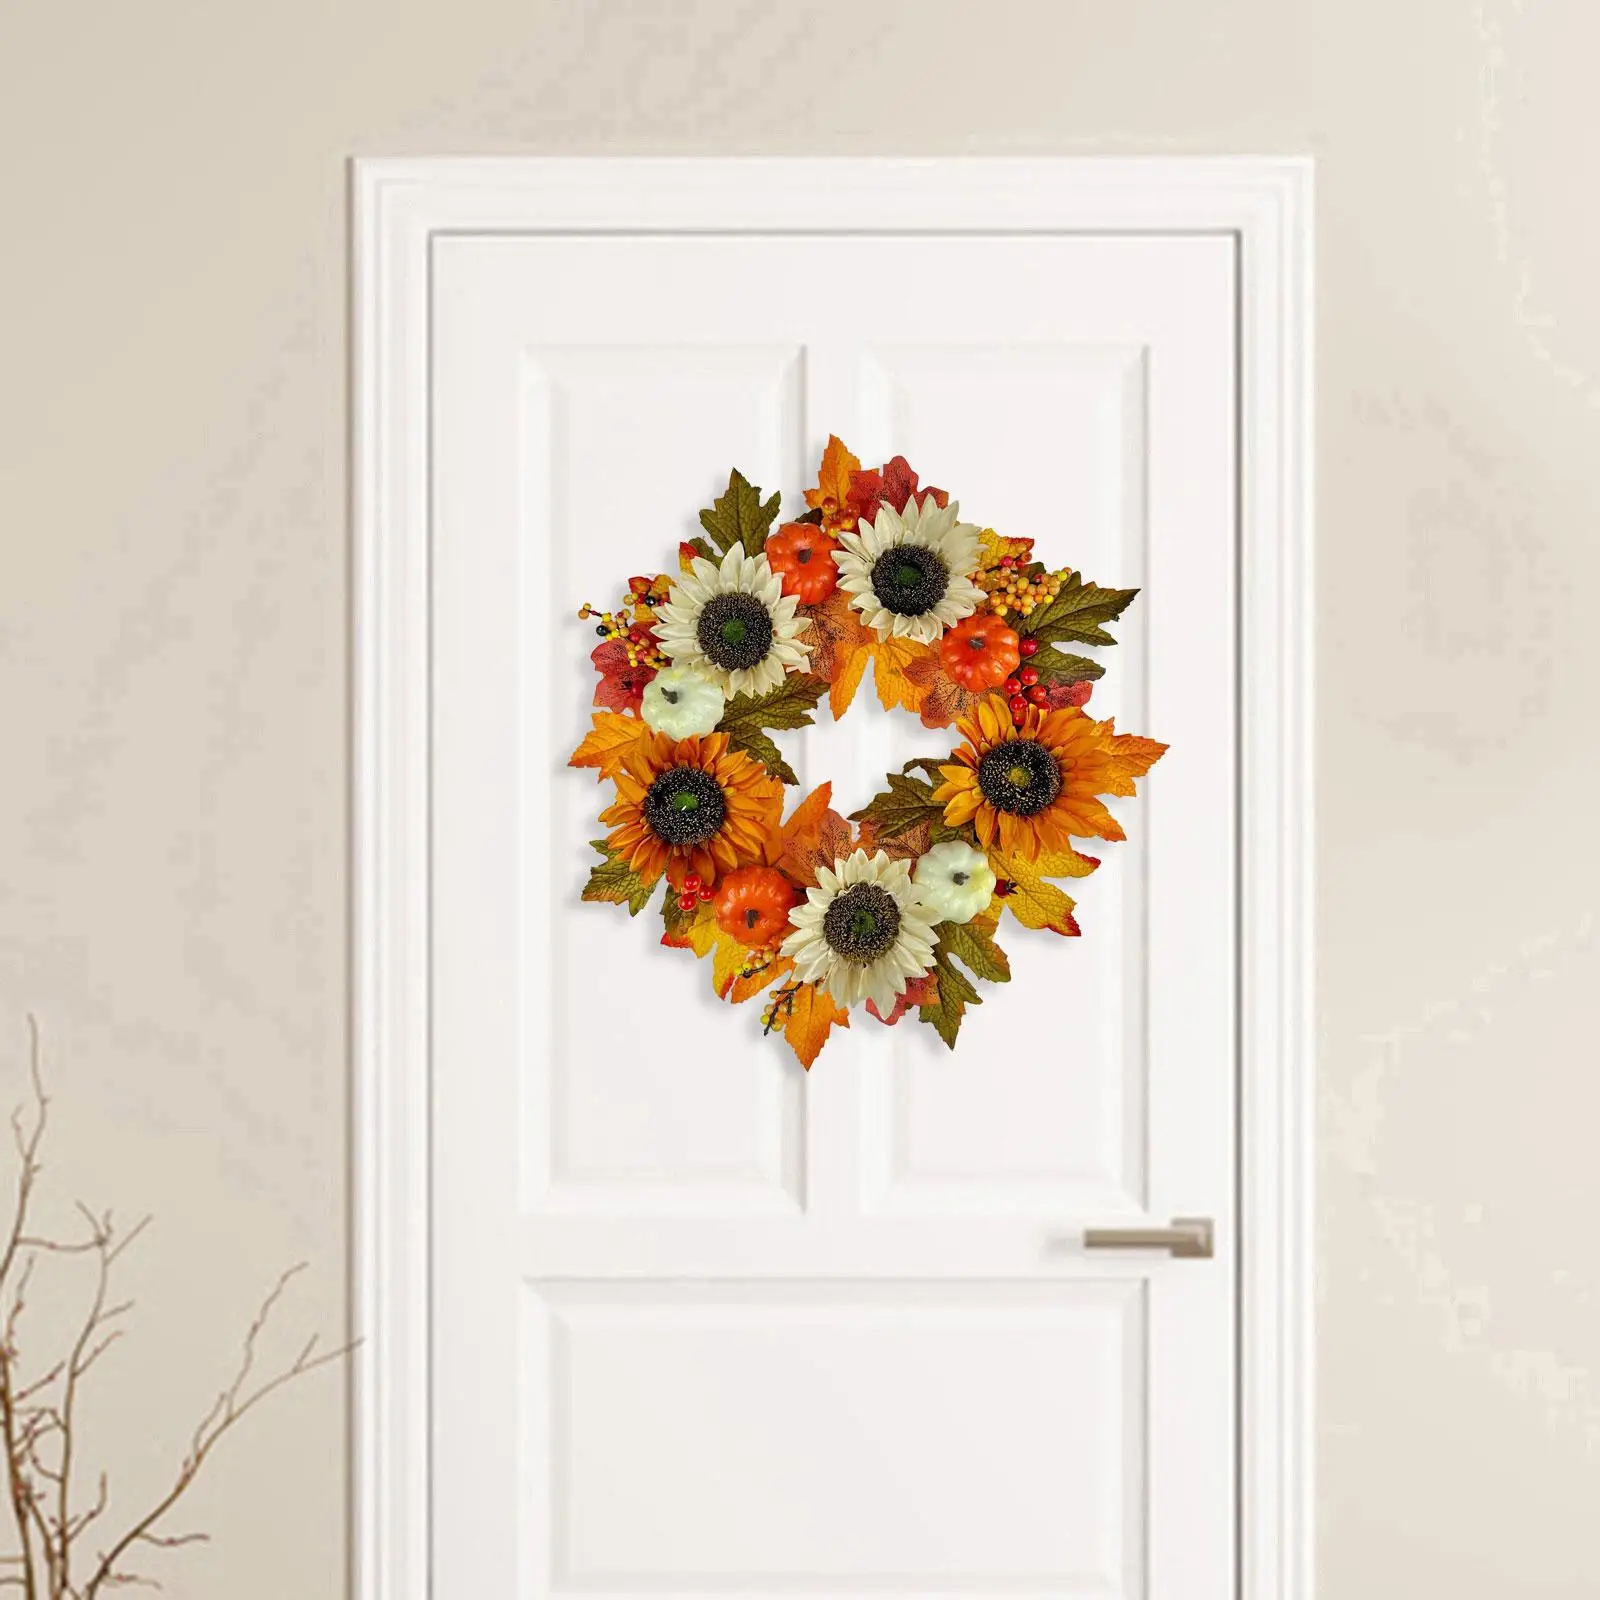 Fall Wreath Floral Wreath Berries Maple Leaves Wall Hanging Harvest Garland for Fall Front Door Thanksgiving Housewarming Home